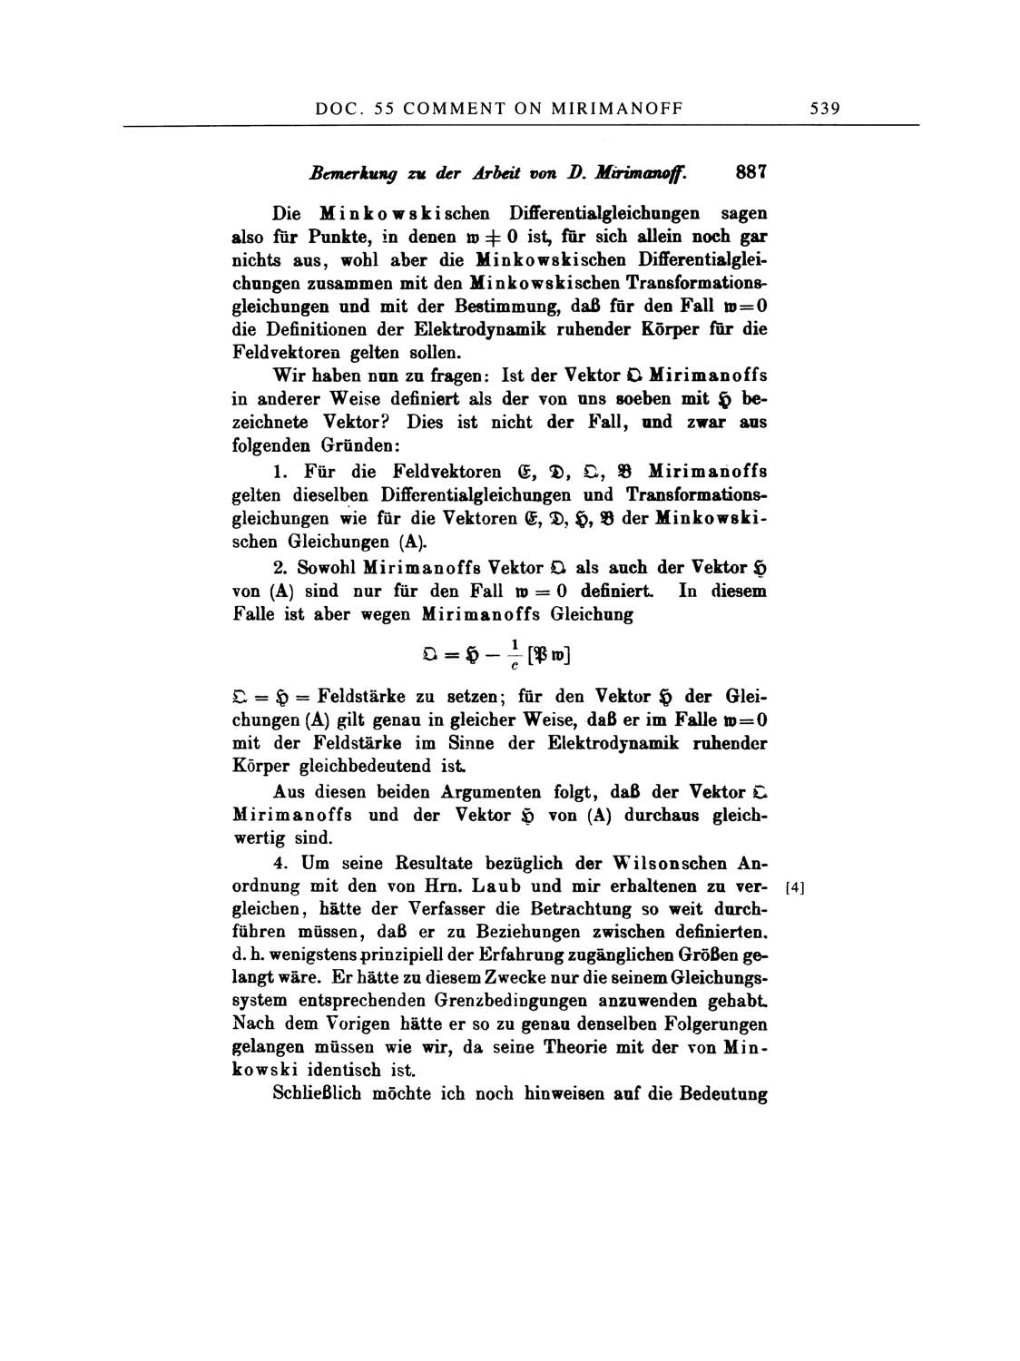 Volume 2: The Swiss Years: Writings, 1900-1909 page 539